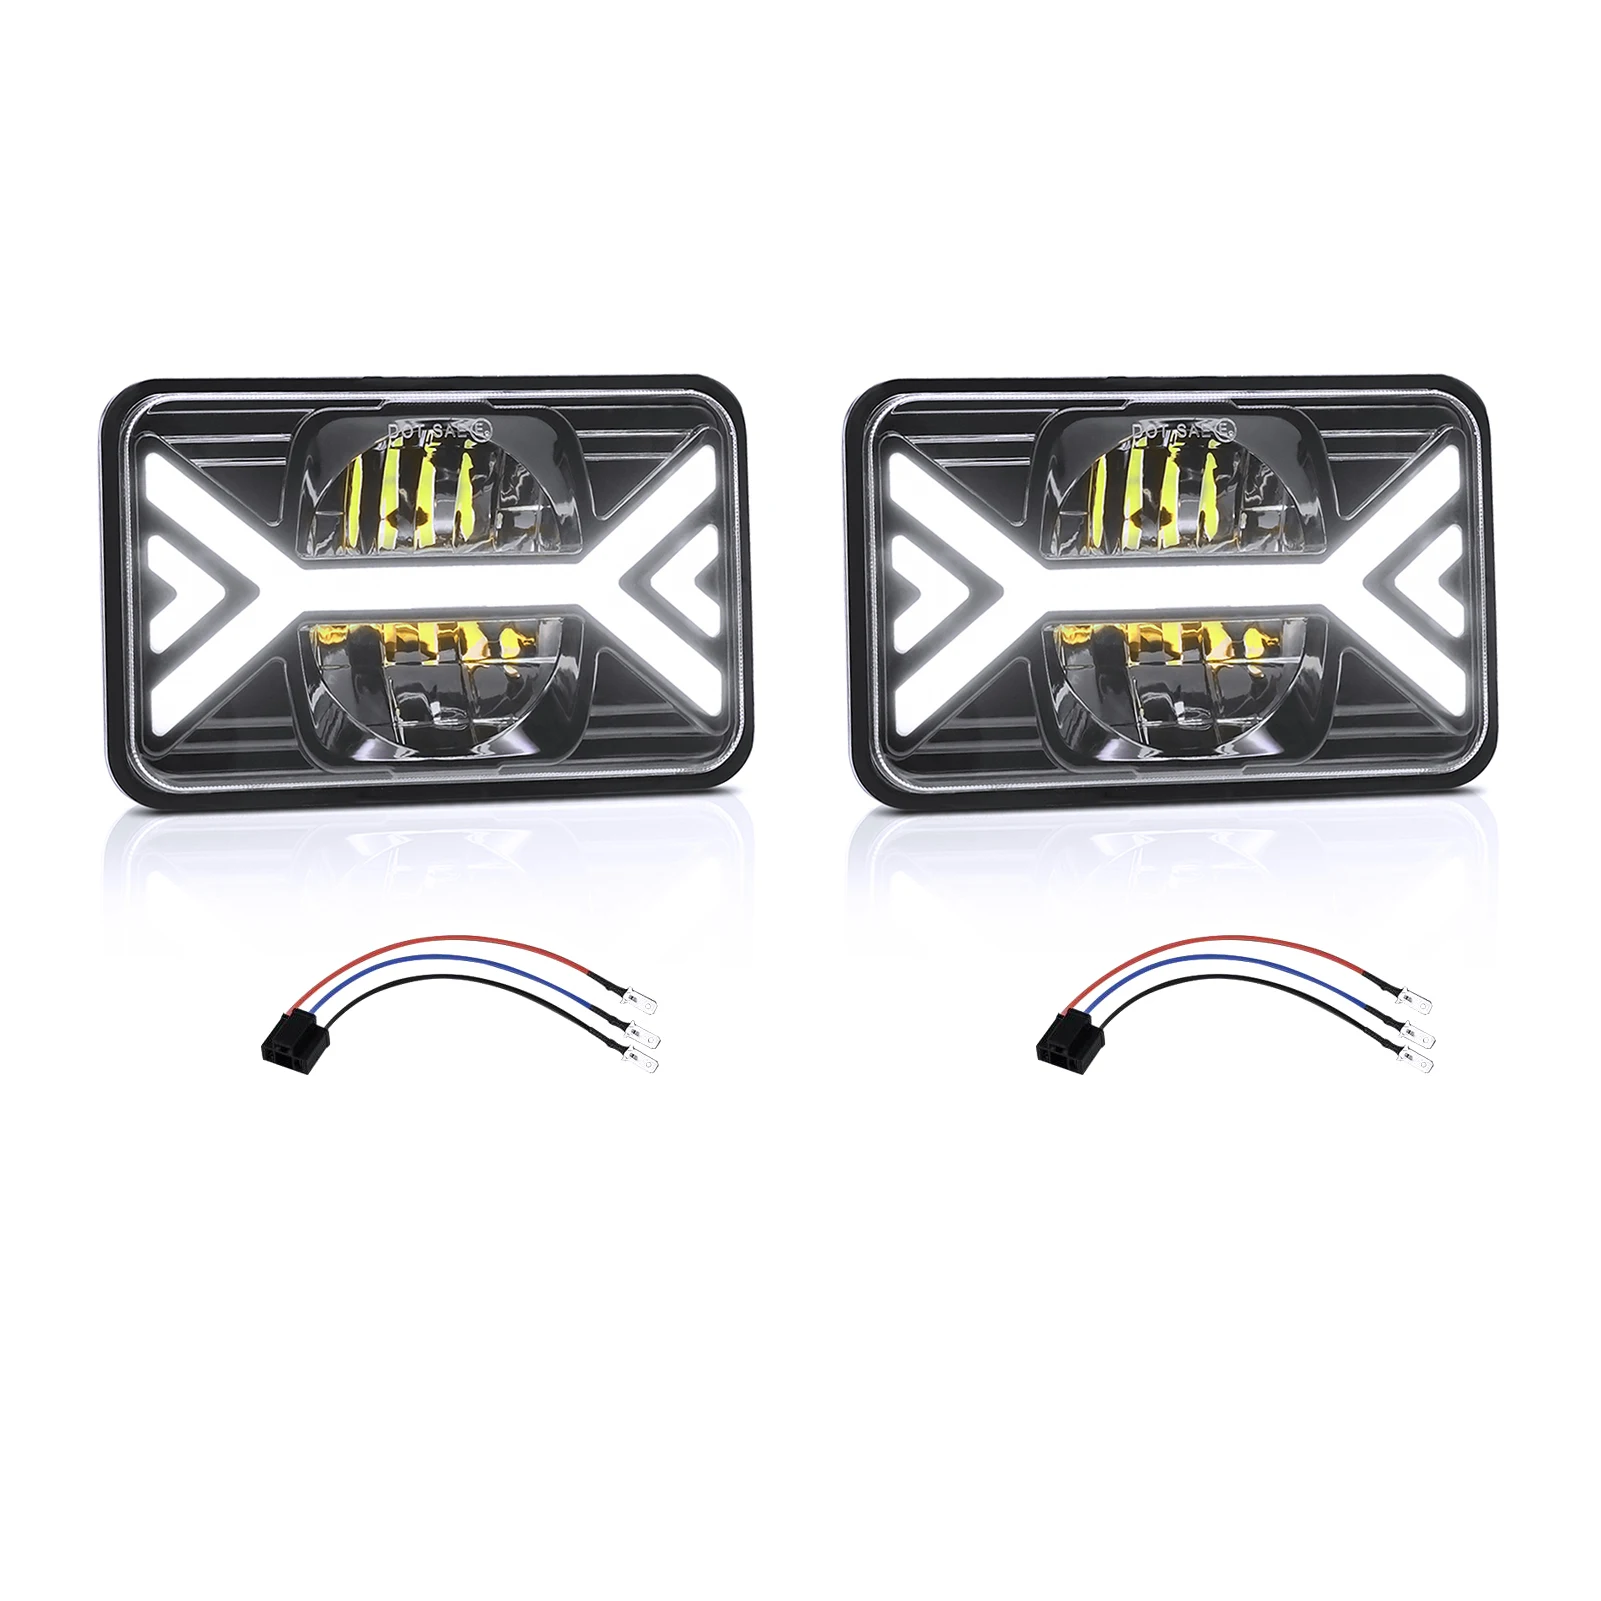 

2 Pack 5inch Car LED Headlights 4x6 inch Headlamp with White High/Low Beam DRL Amber Turn Signal